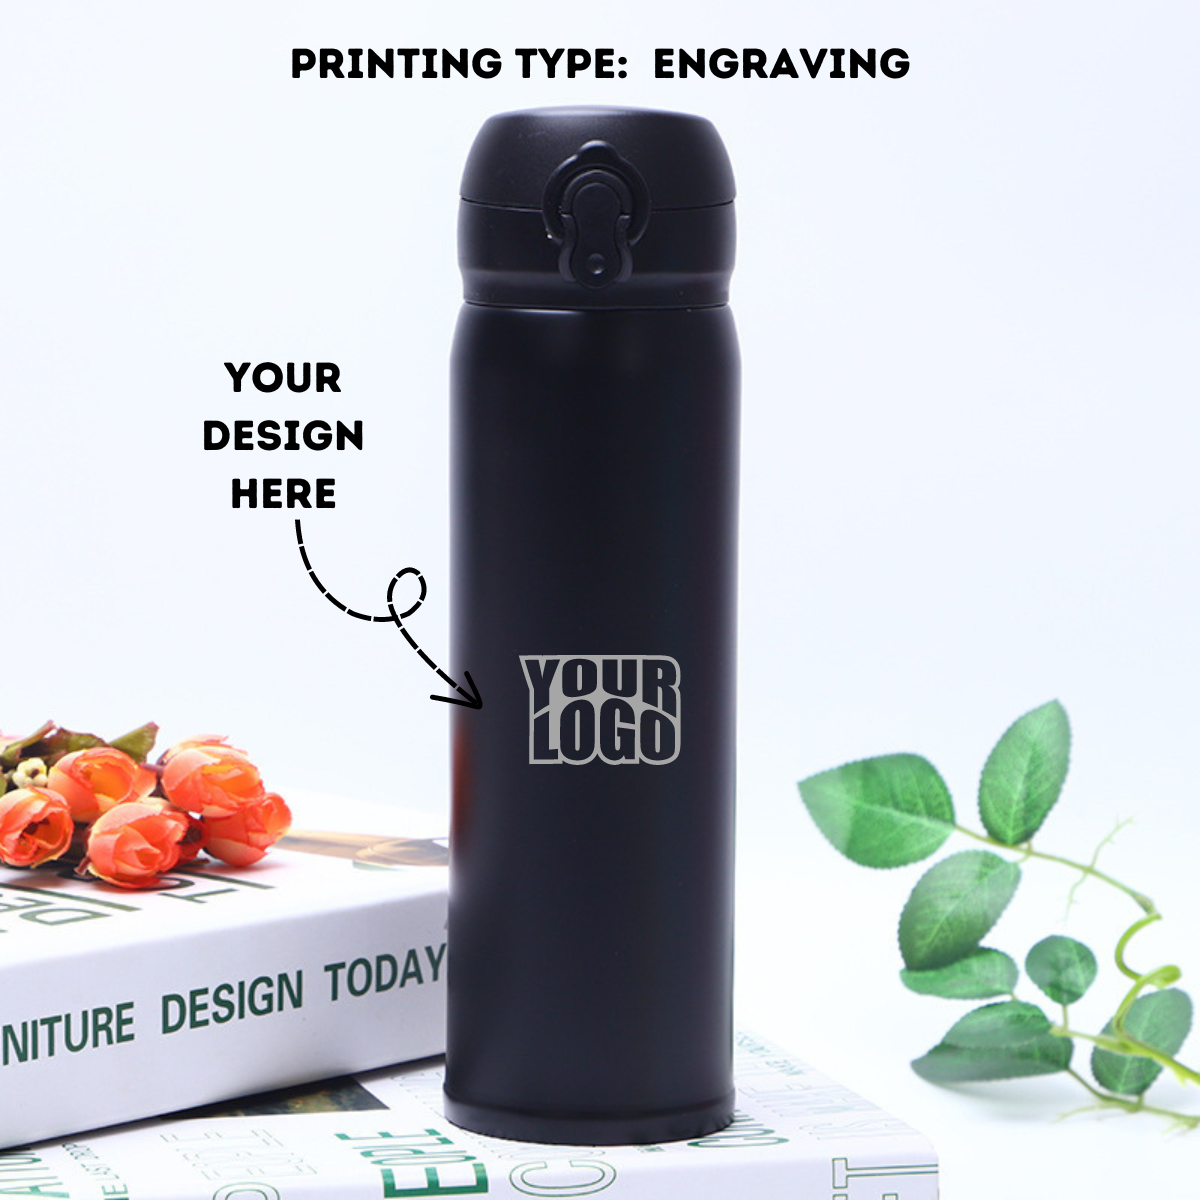 Personalized Engraved BPA Free Black Steel Vacuum Flask - 500ml - For Return Gift, Corporate Gifting, Office or Personal Use